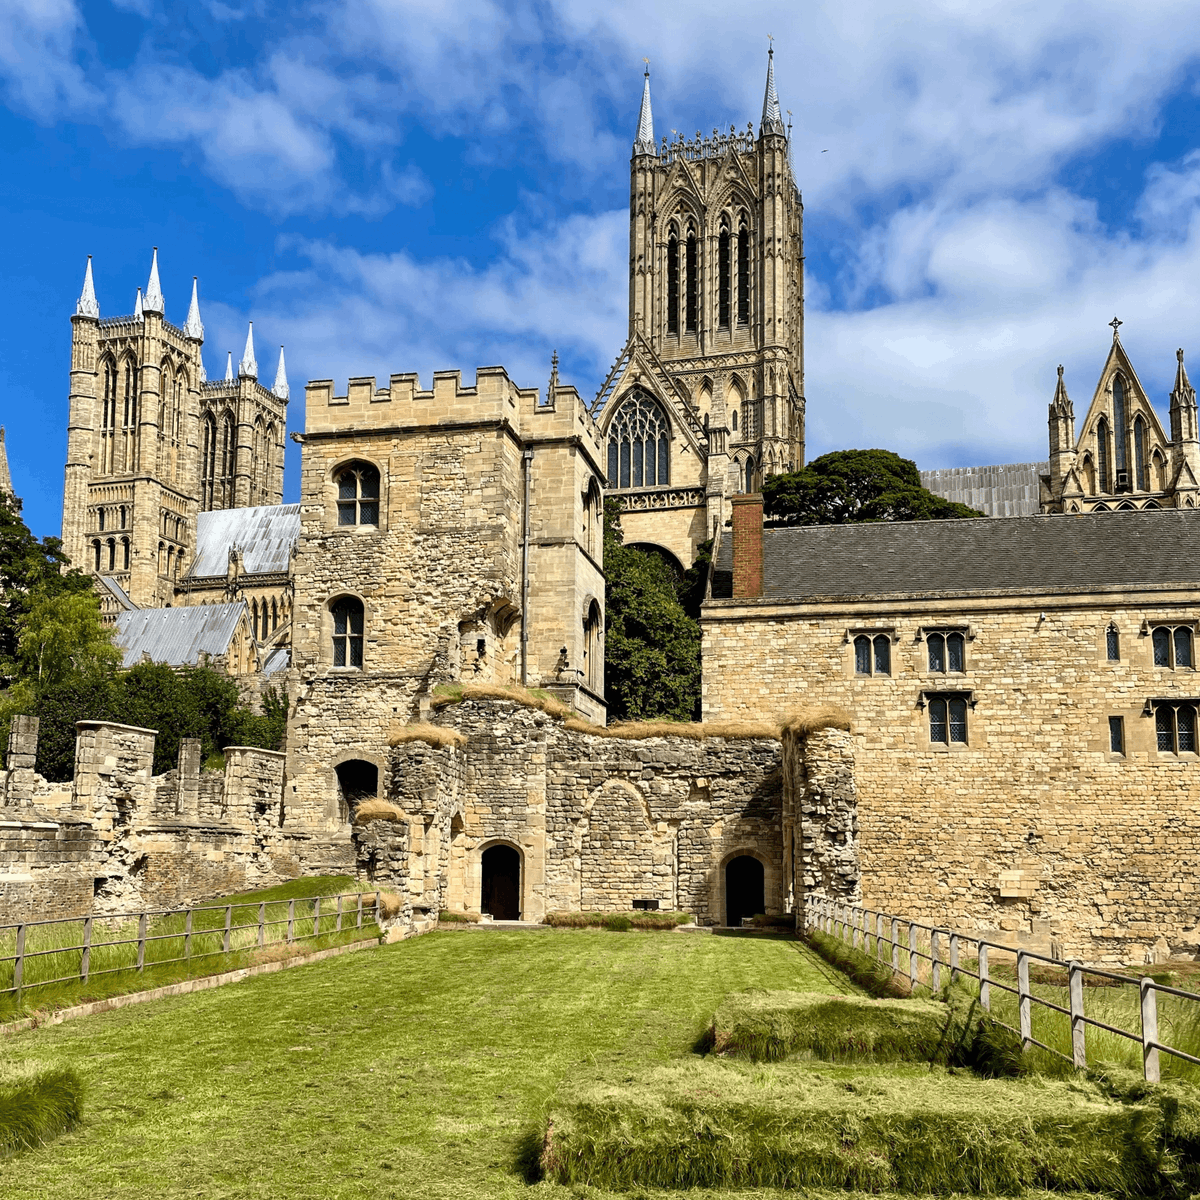 Our next heritage highlight is Medieval Bishop's Palace 🗝️ Once the administrative centre of the largest diocese in medieval England, this incredible building has a fascinating past! Visit on Monday 6 May to enjoy live theatre by Lincoln Mystery Plays. bit.ly/3vYPguM